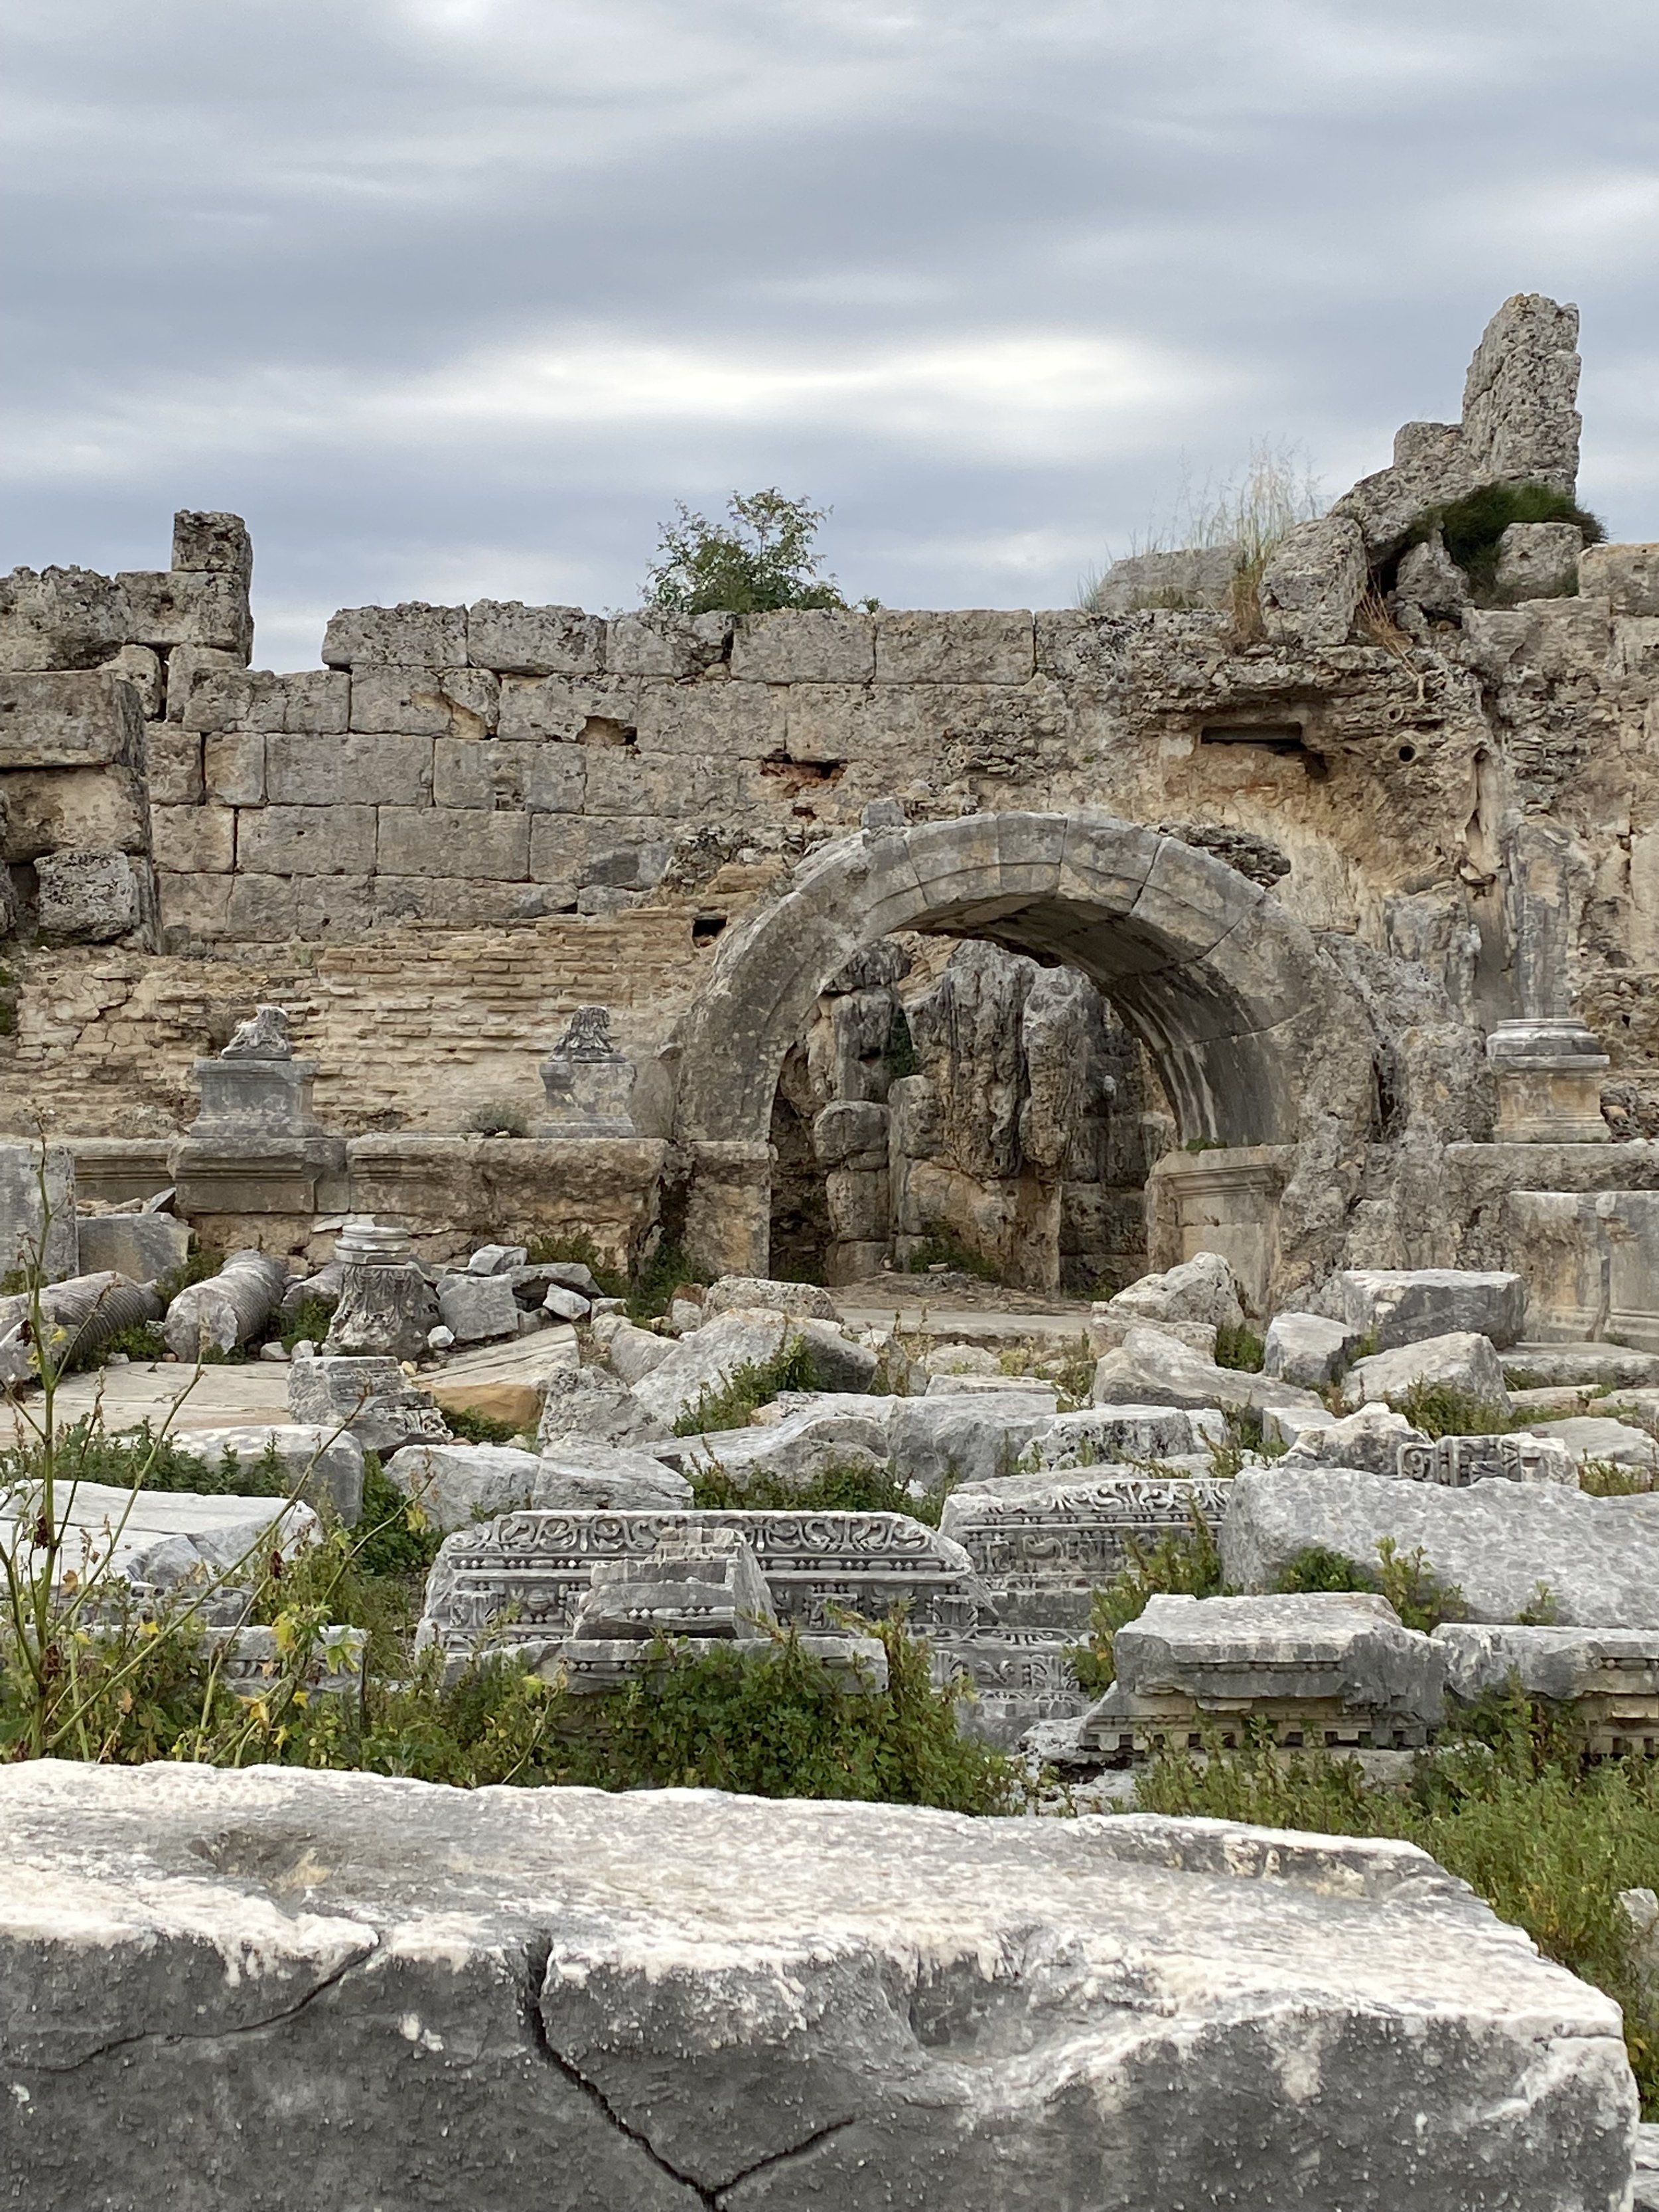 Ruins of the important city of Perga, where Paul began his first missionary journey.